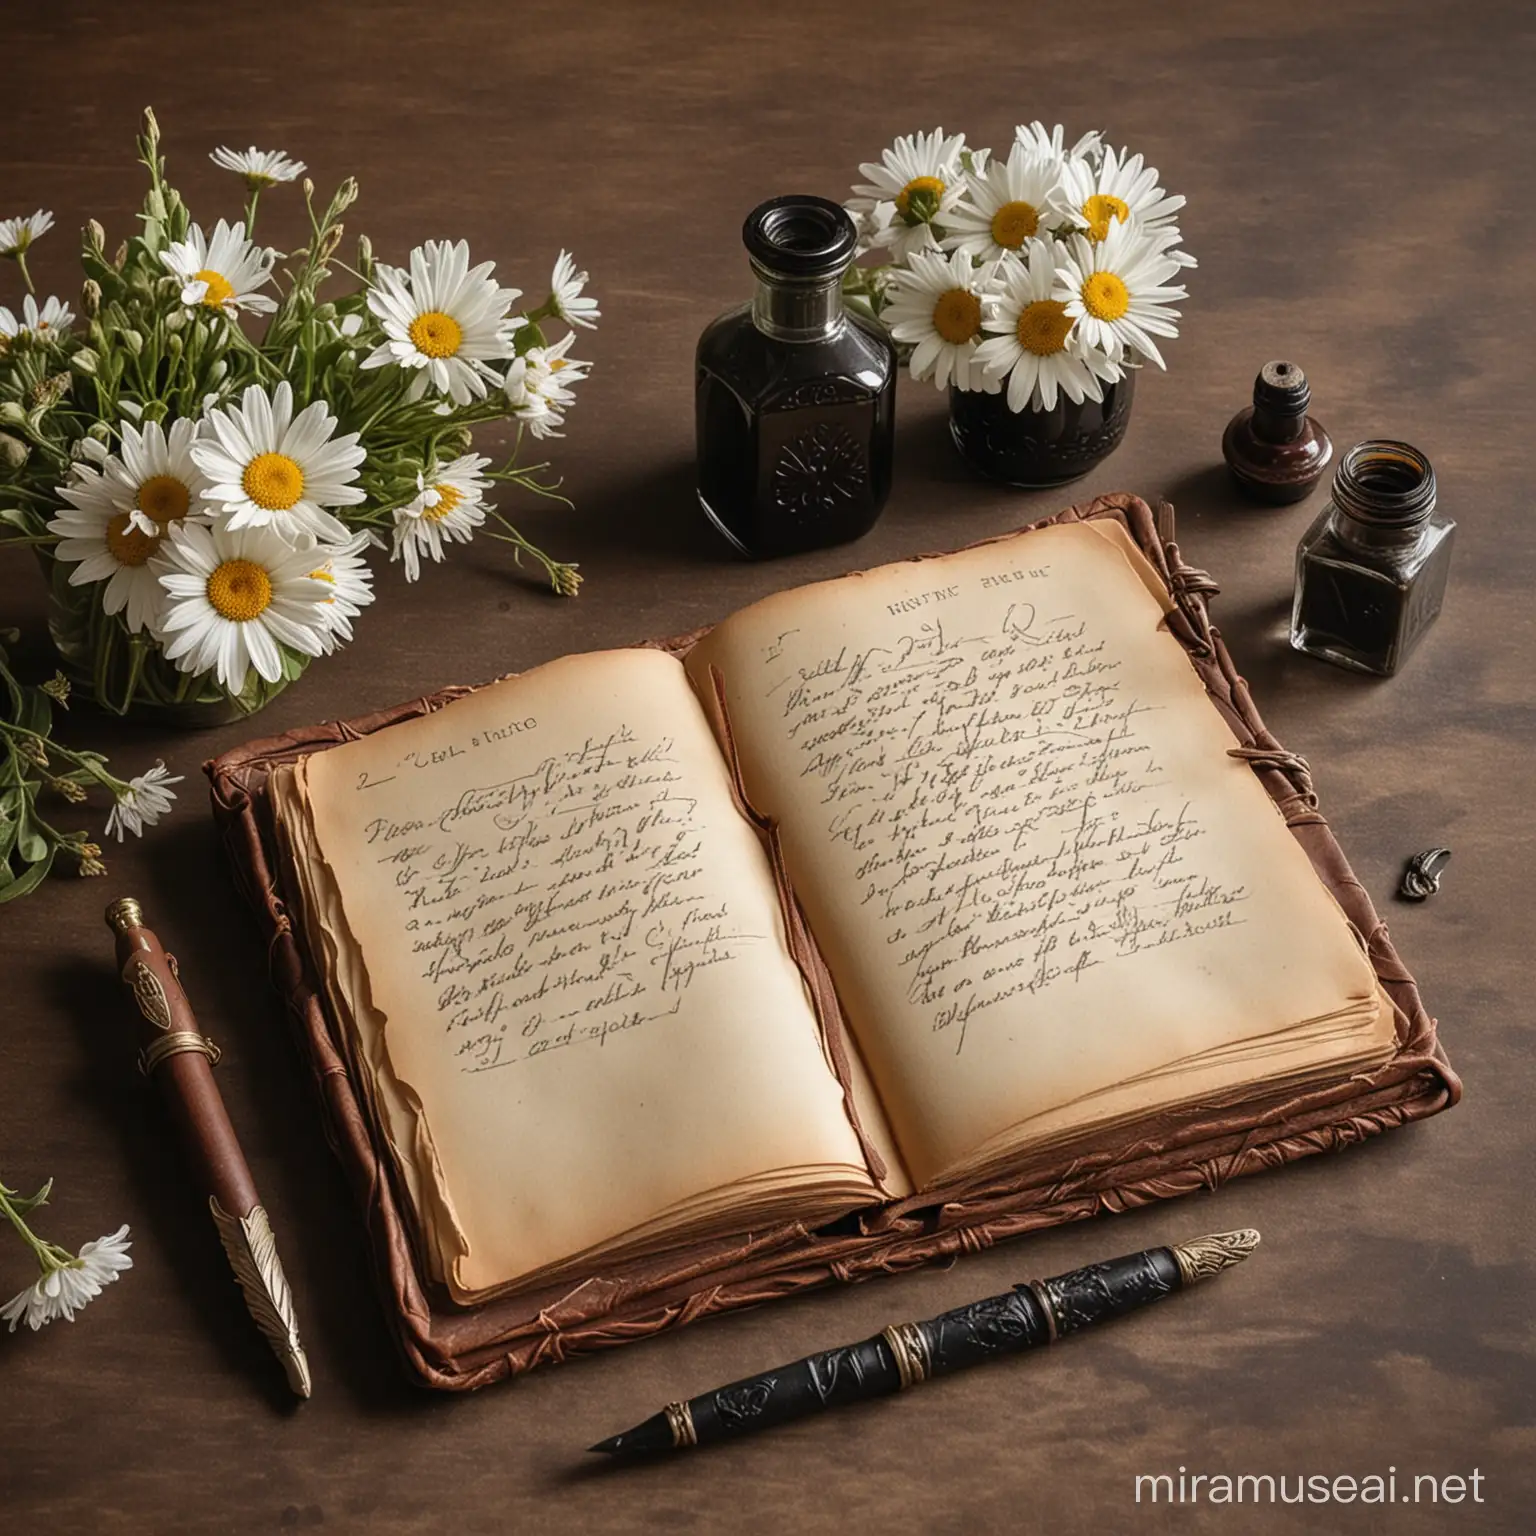 Vintage Journal with Quill Pen and Daisies on Wooden Desk